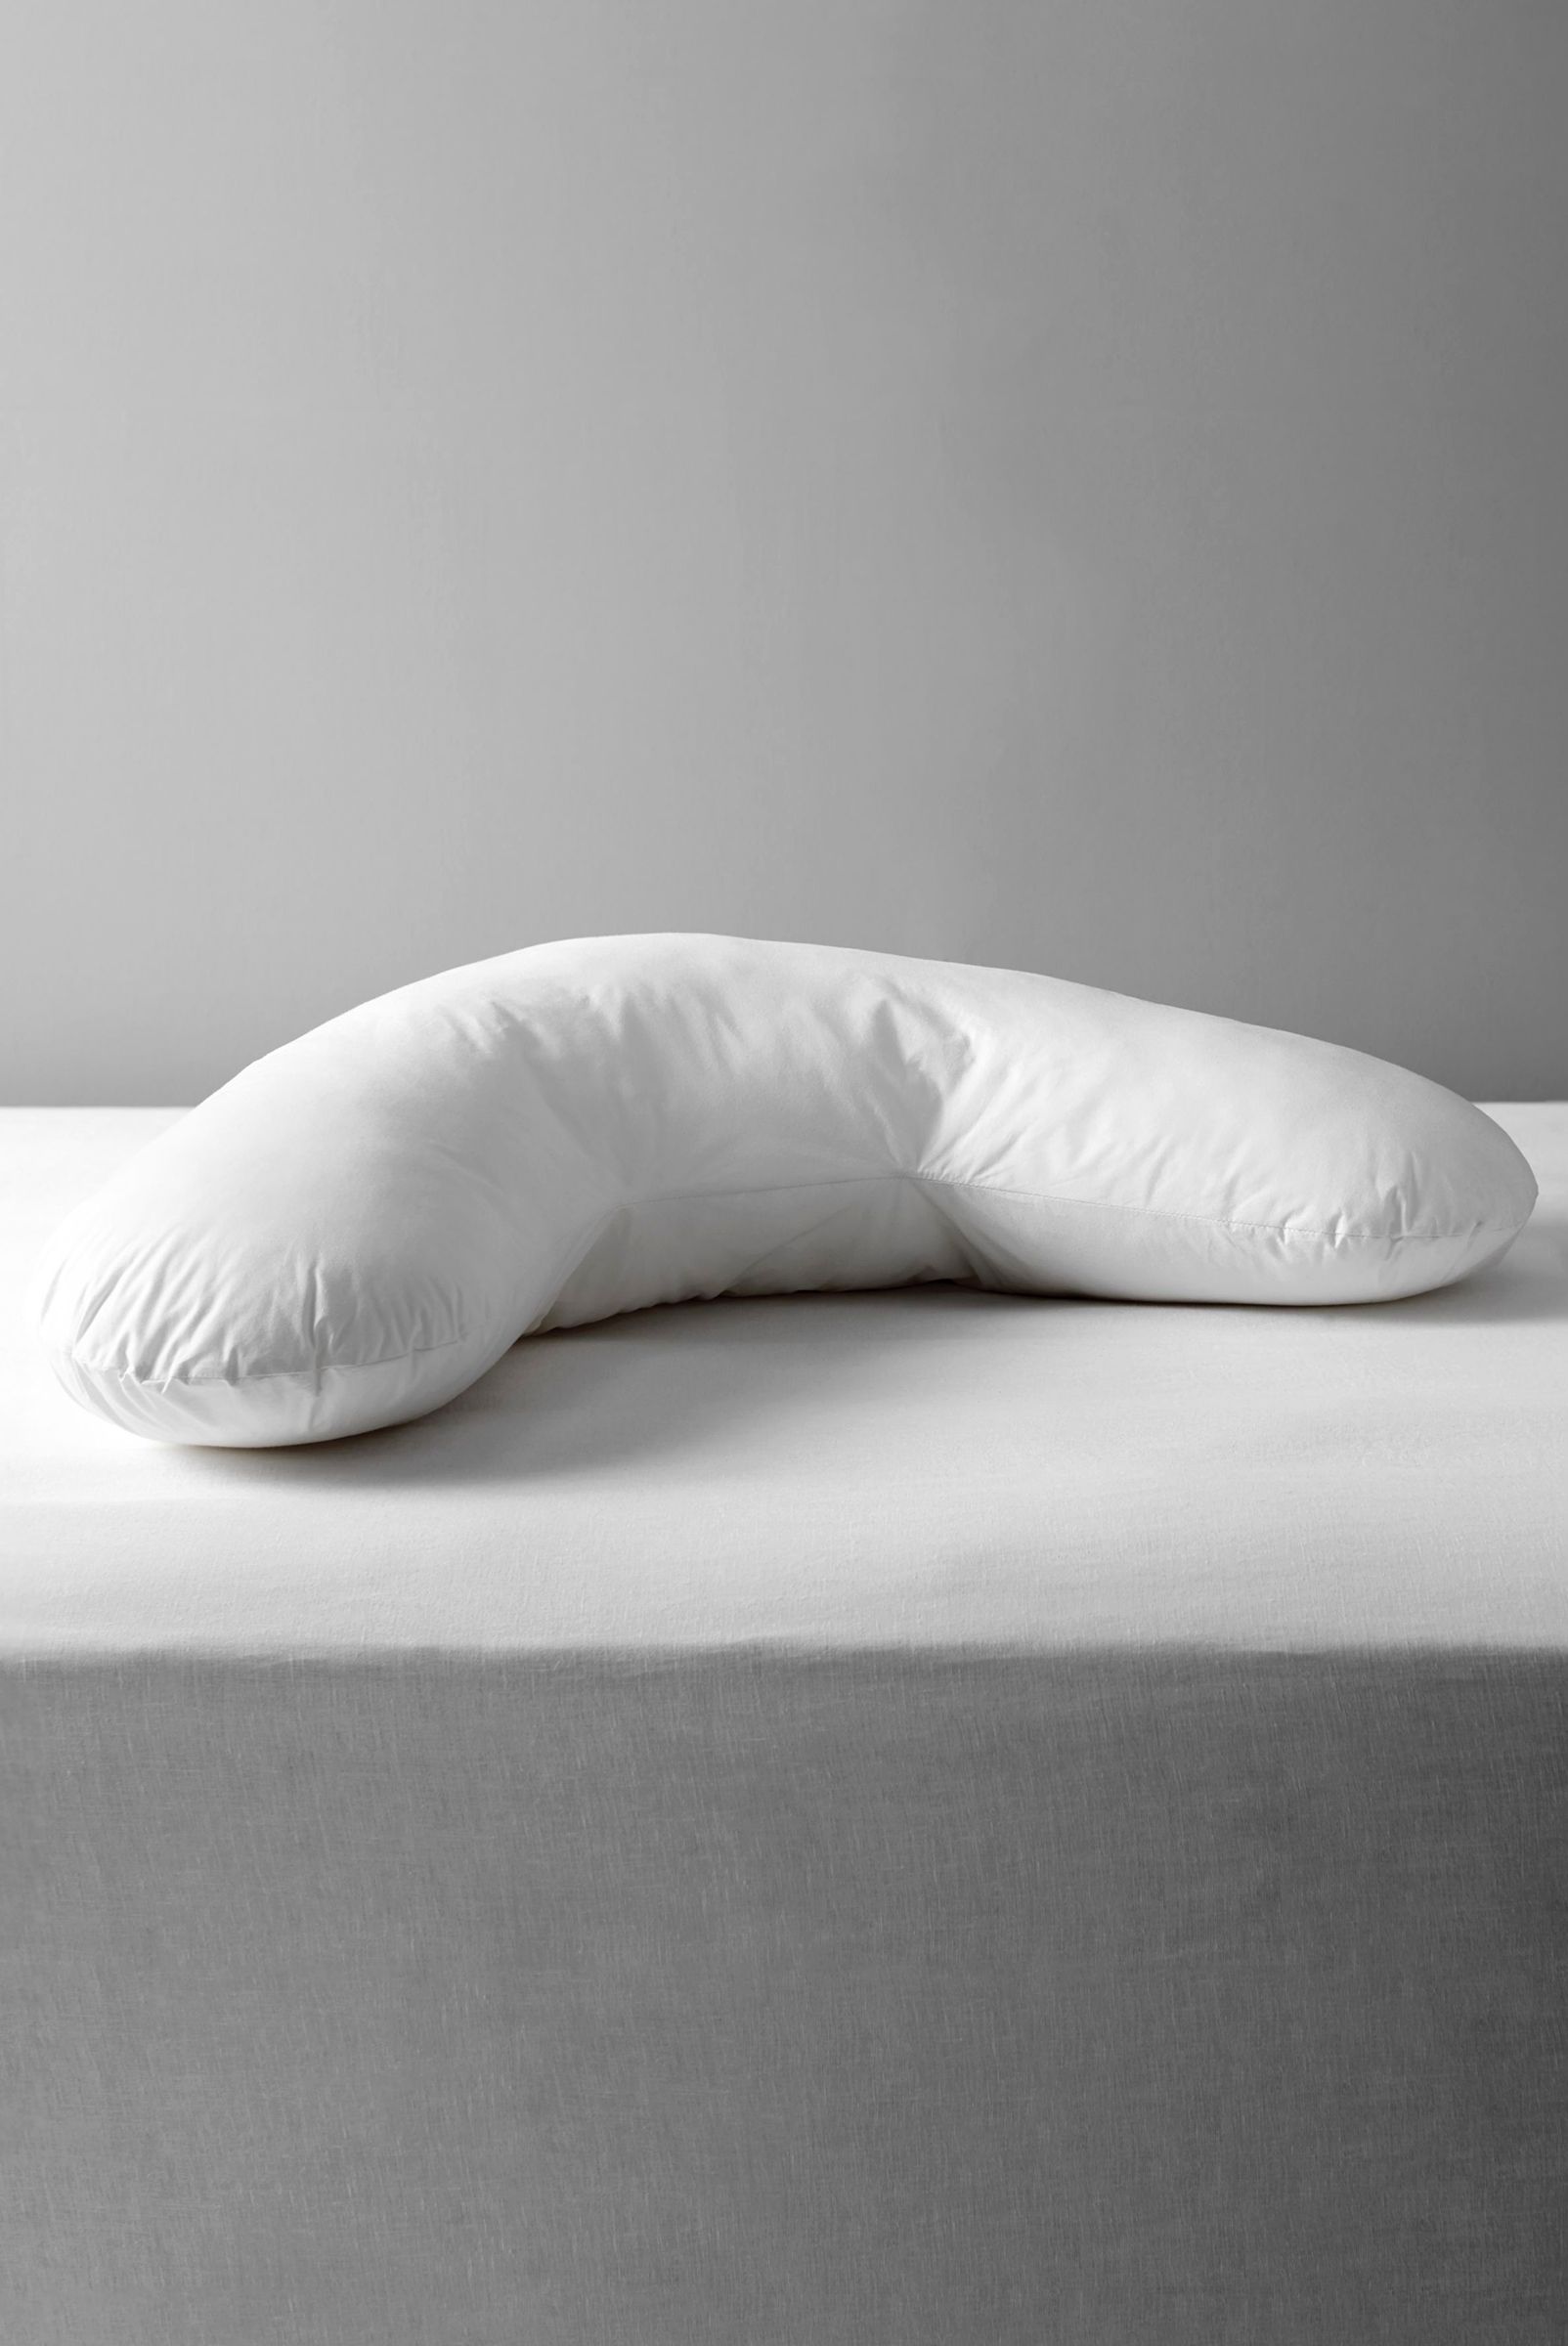 John Lewis Specialist Synthetic Carefree Comfort Teflon V-Shaped Support Pillow, £32.00